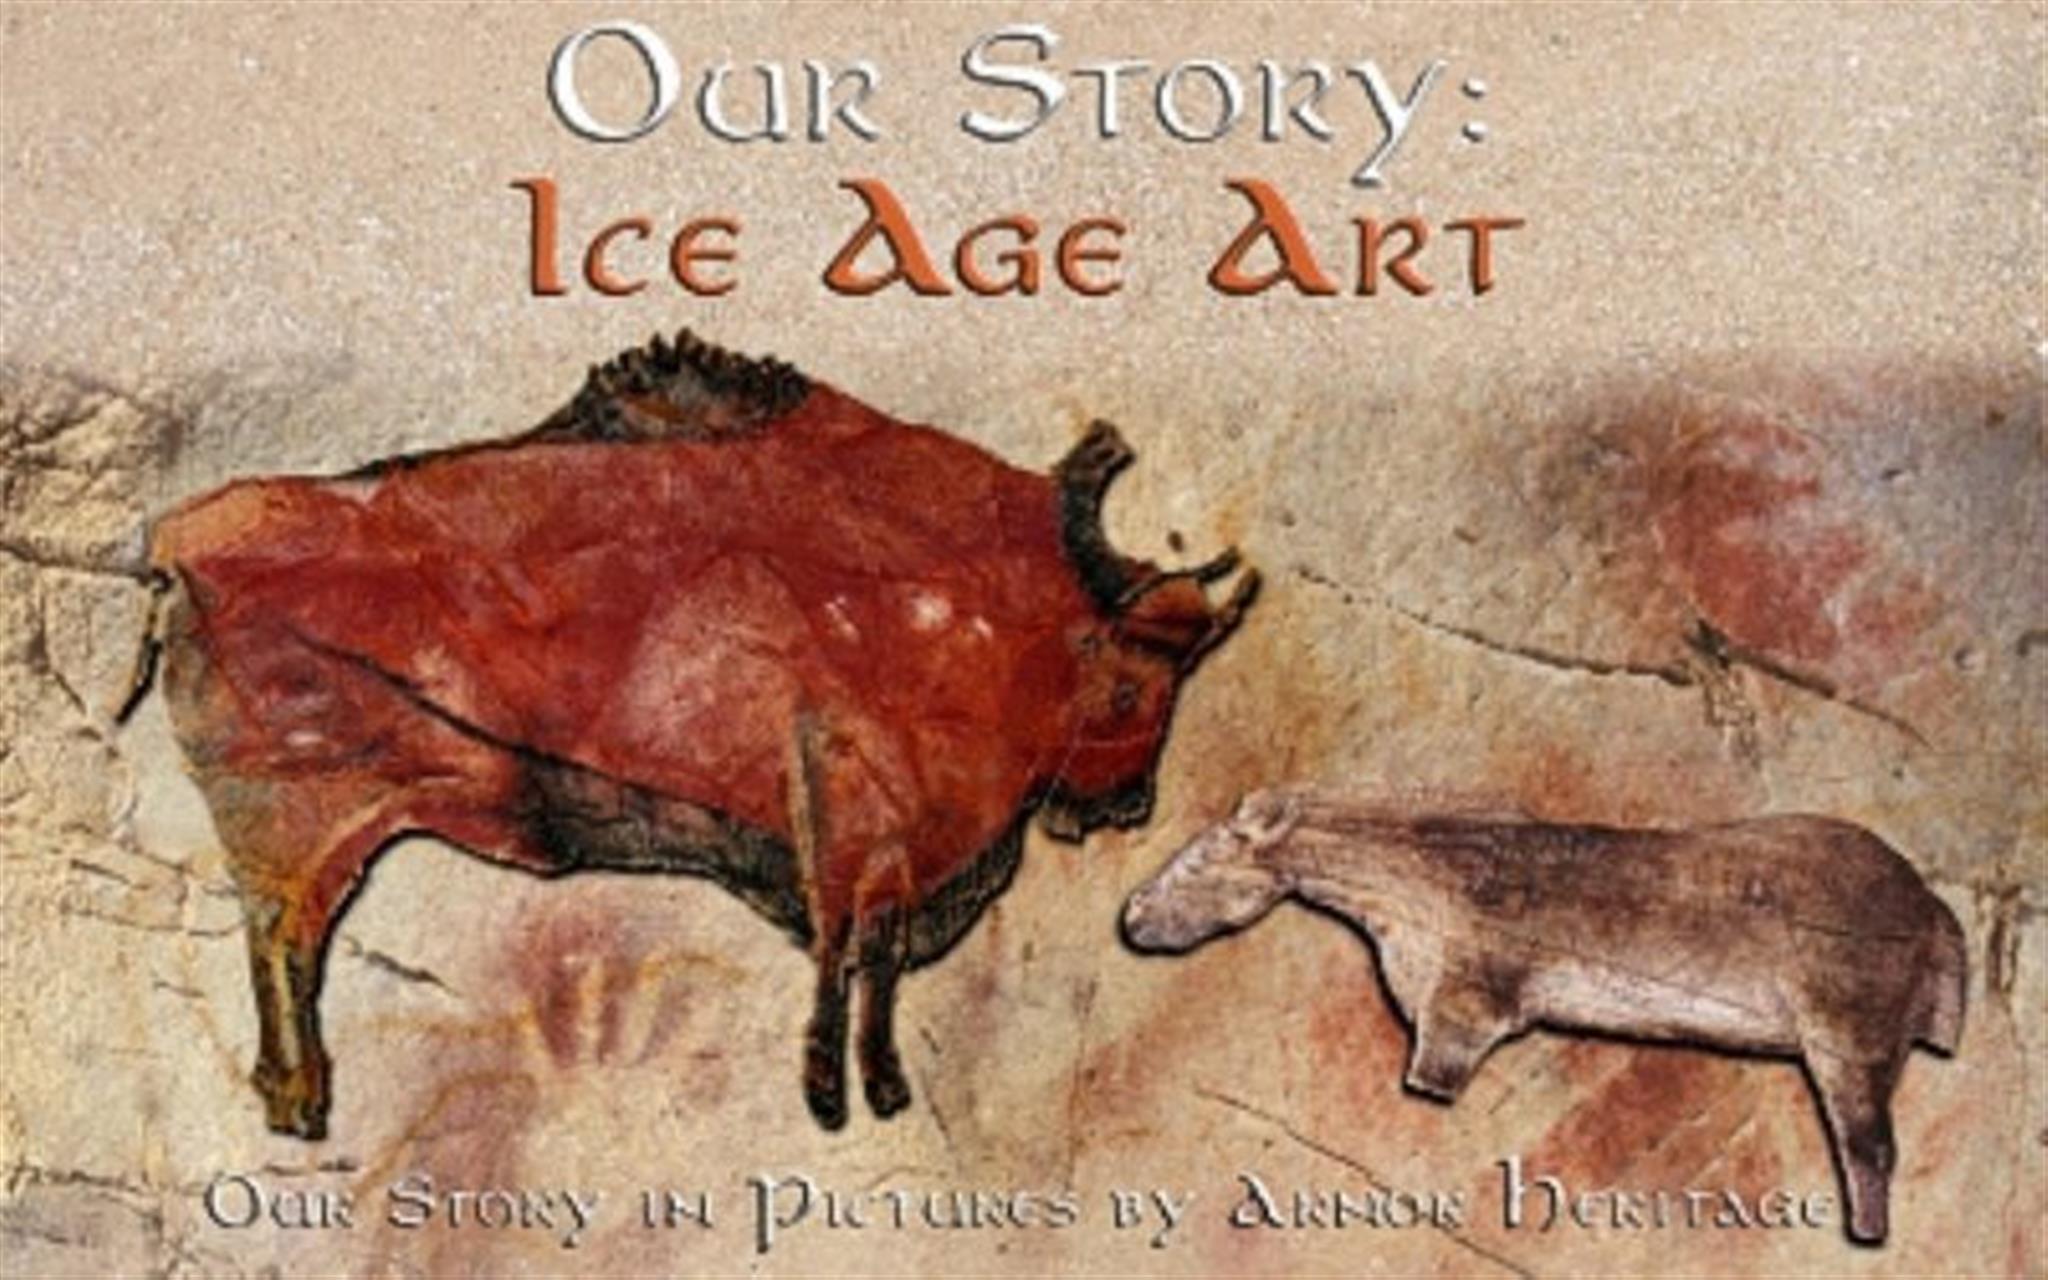 Ice Age Art and the Modern Mind